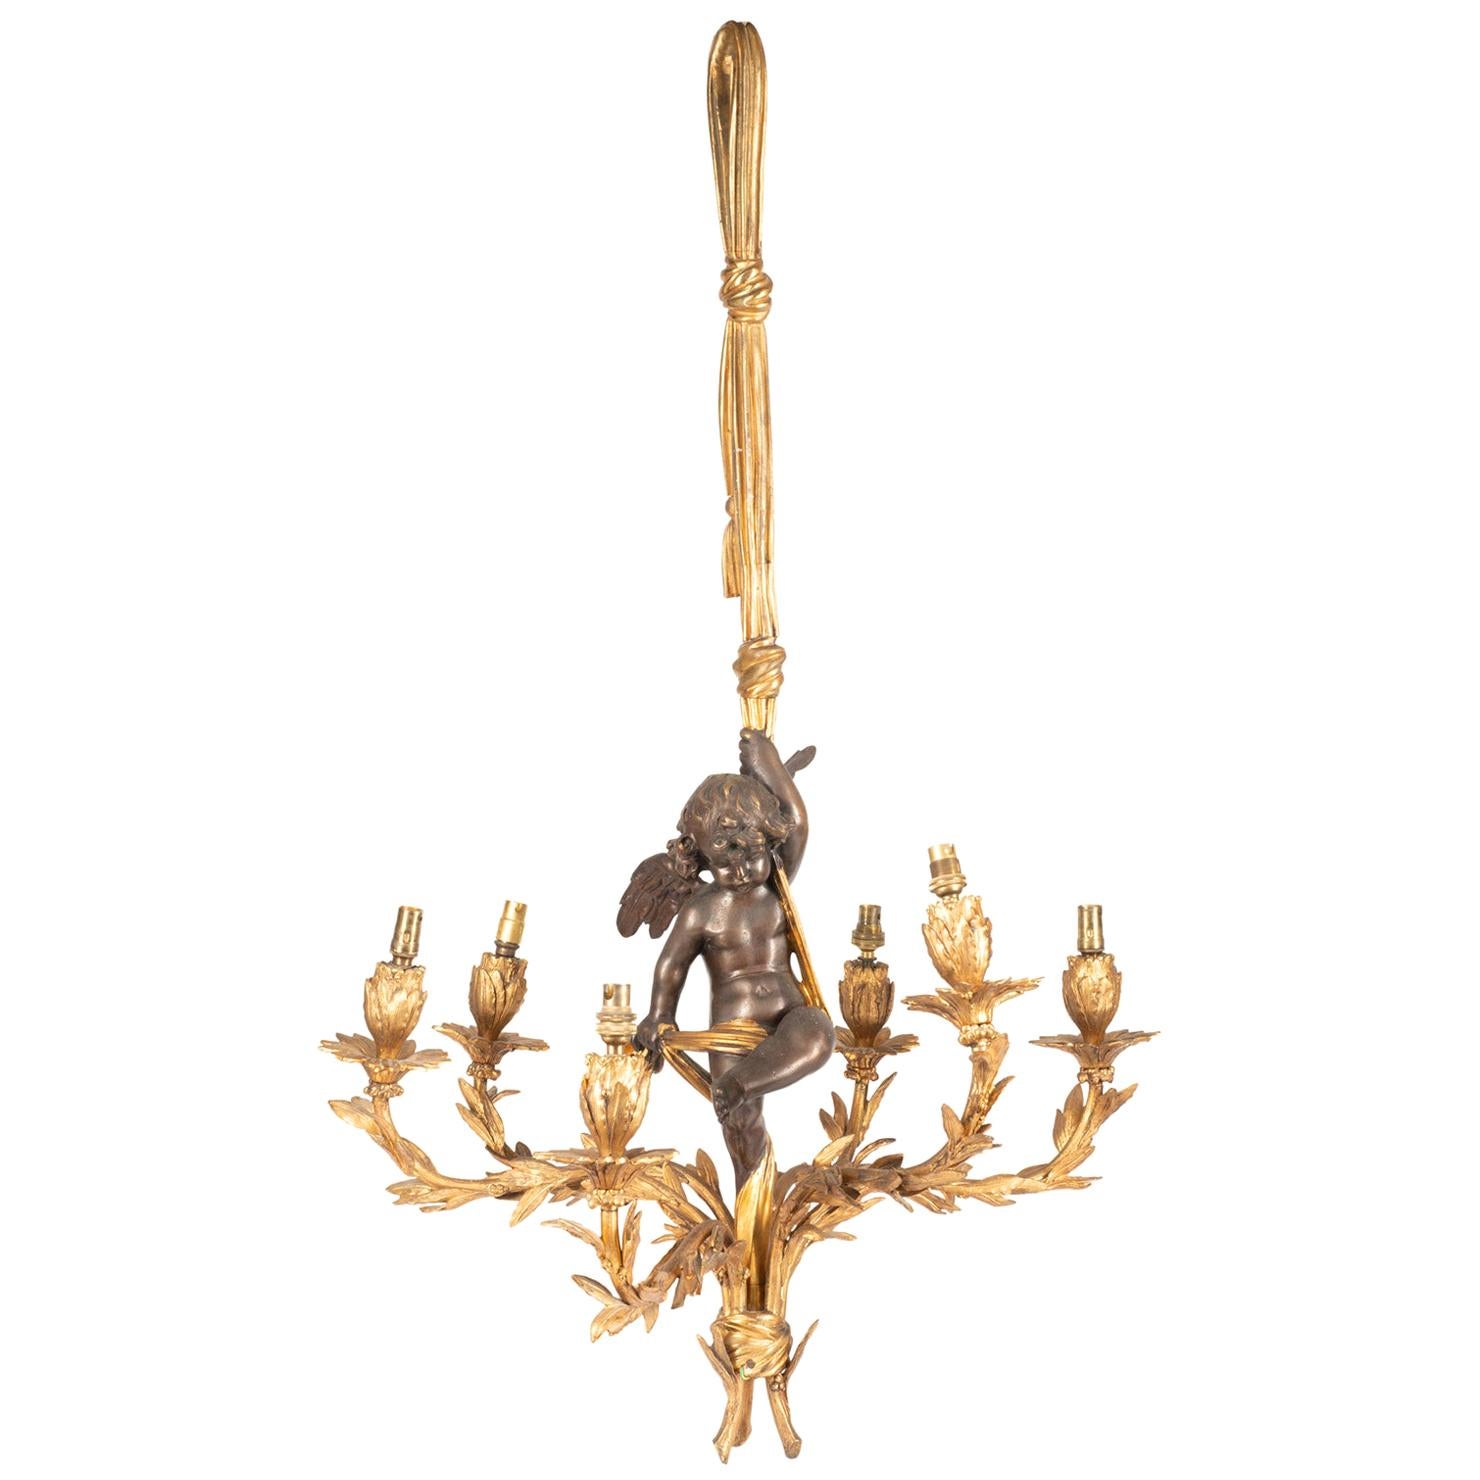 Classical French 19th Century Chandelier For Sale